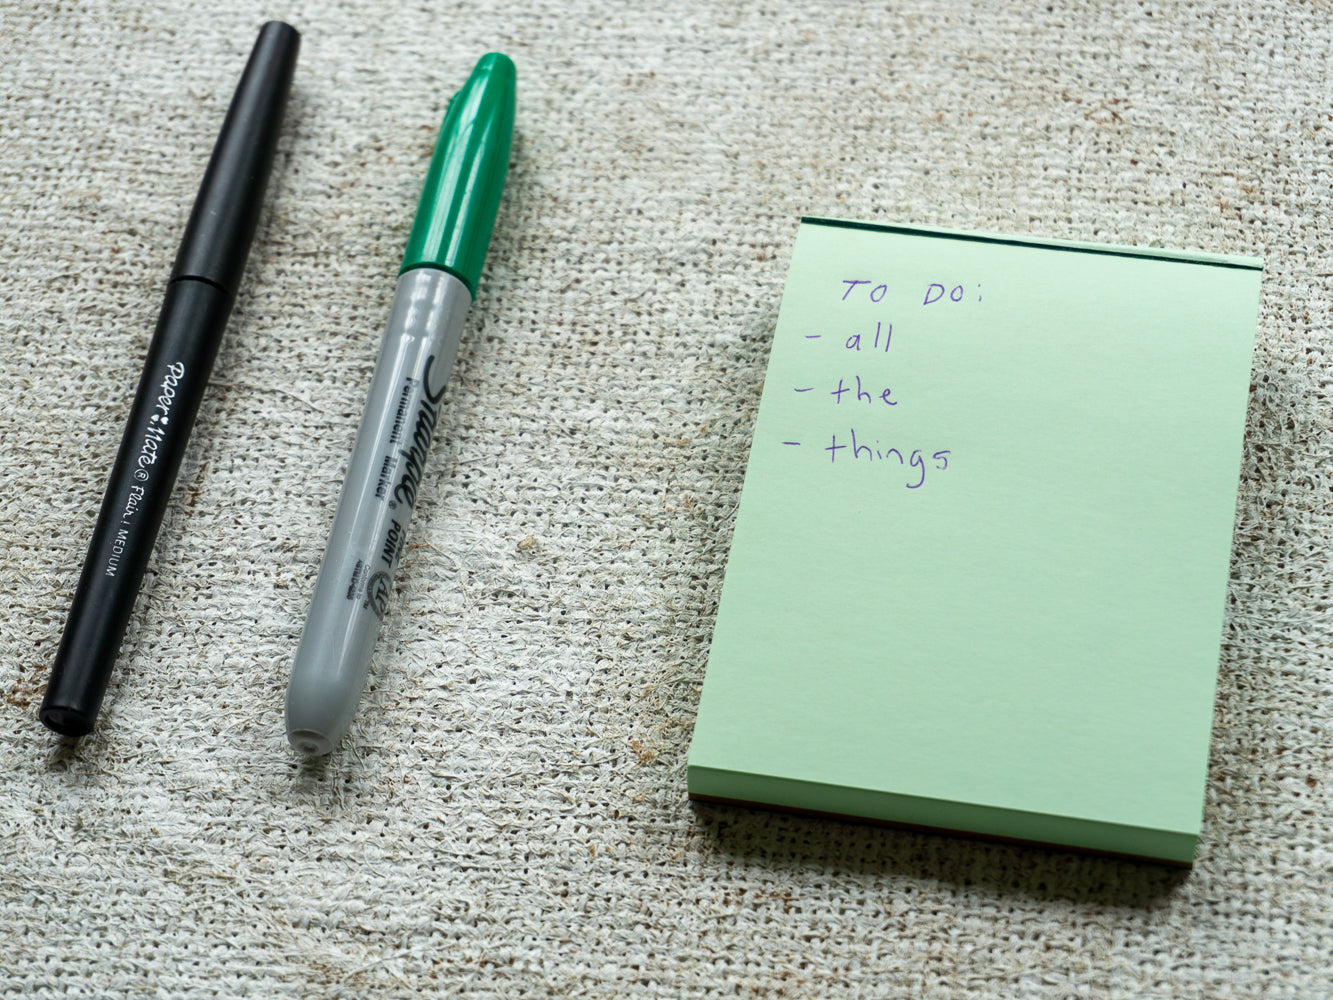 Sample to do list, reading "To Do: -all -the -things".